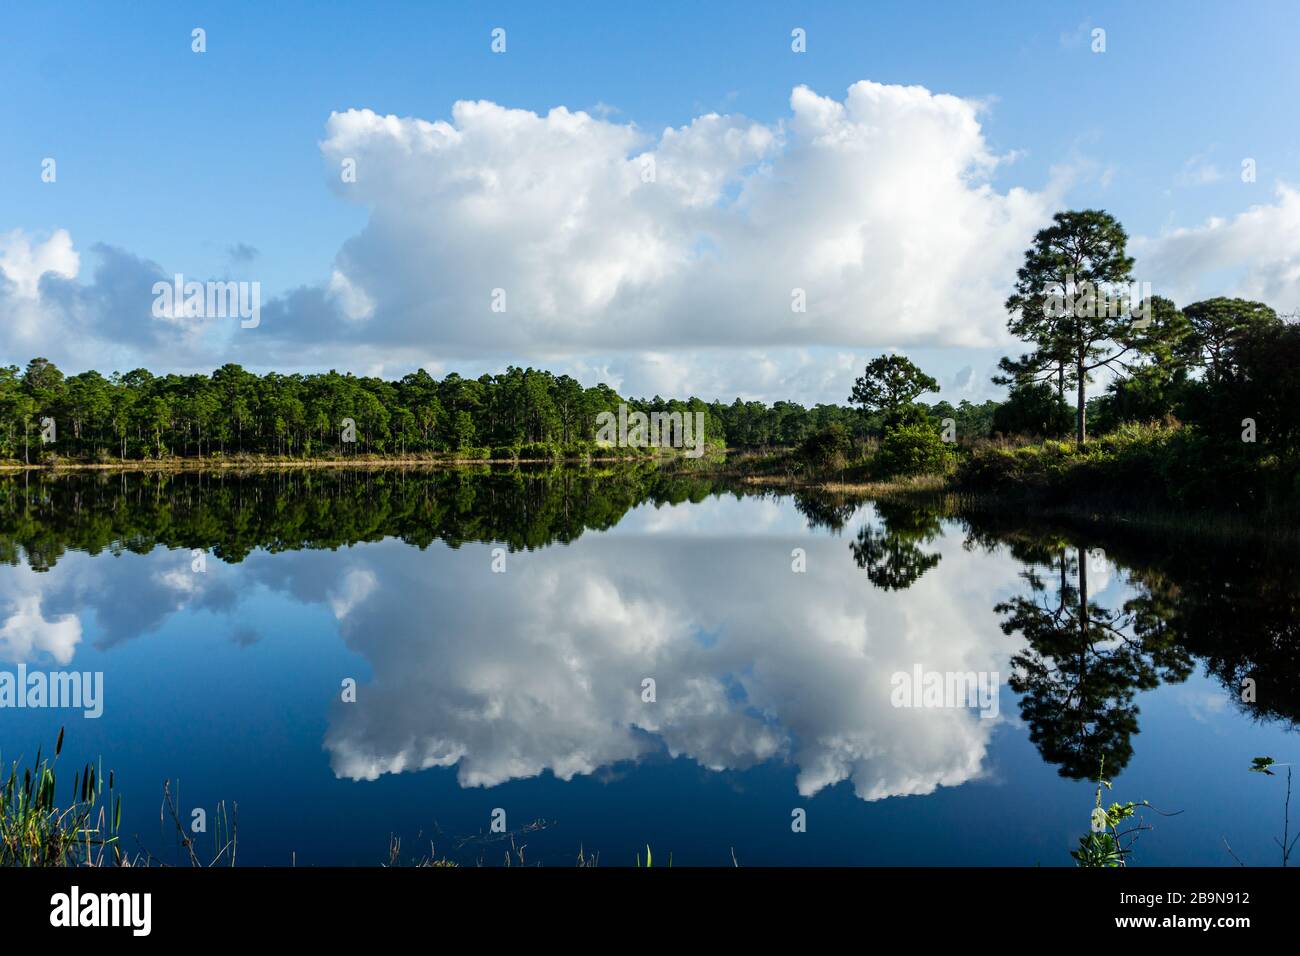 Green pine trees and puffy white clouds reflected on a smooth lake, Halpatiokee Regional Park, Stuart, Florida, USA Stock Photo